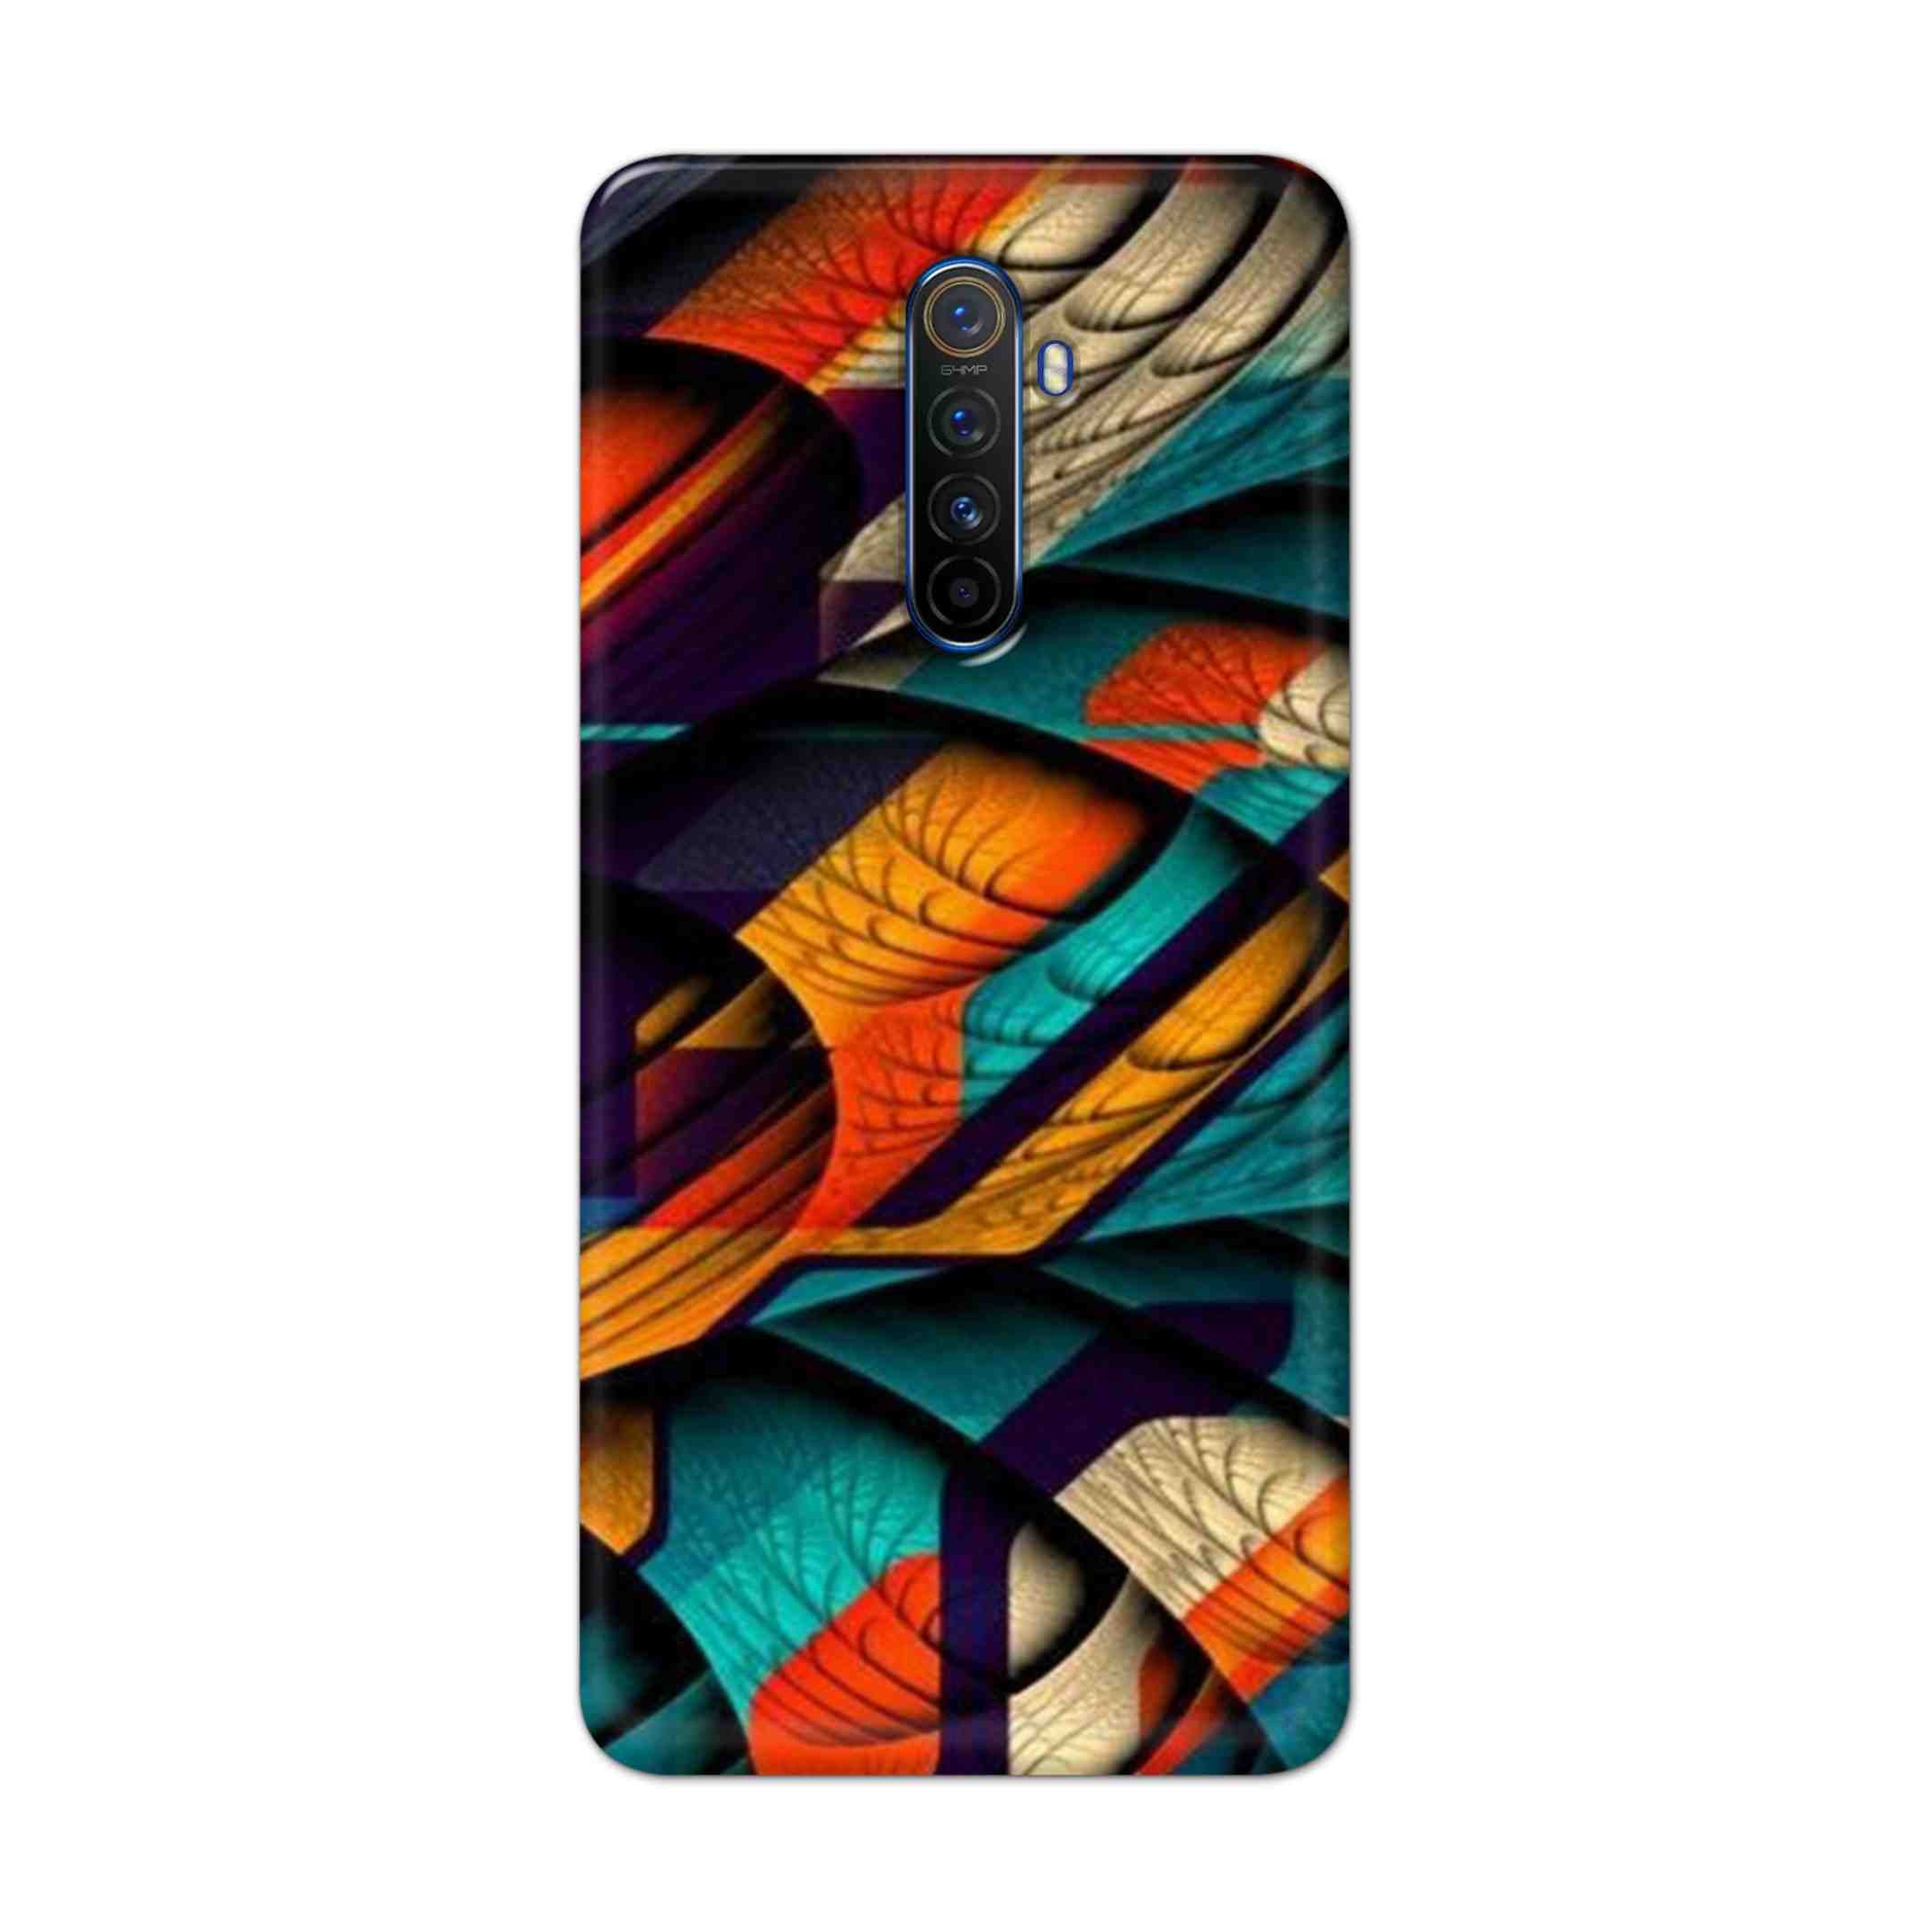 Buy Colour Abstract Hard Back Mobile Phone Case Cover For Realme X2 Pro Online